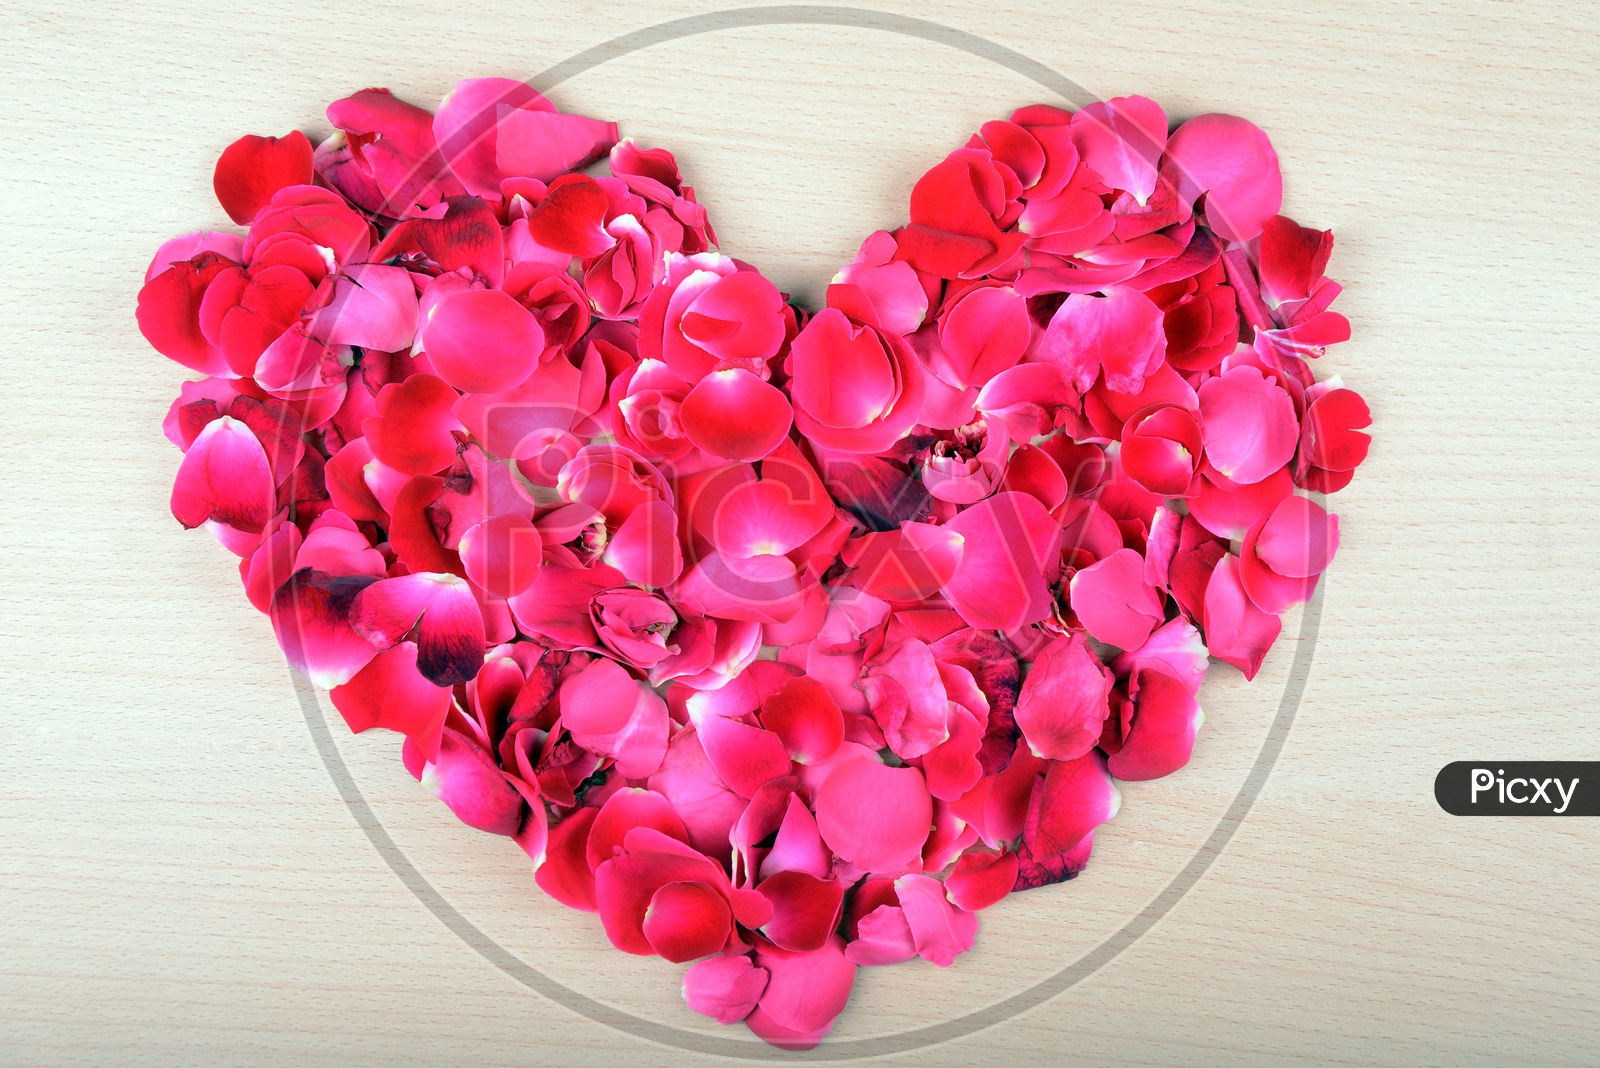 Red Rose petals  in heart shape